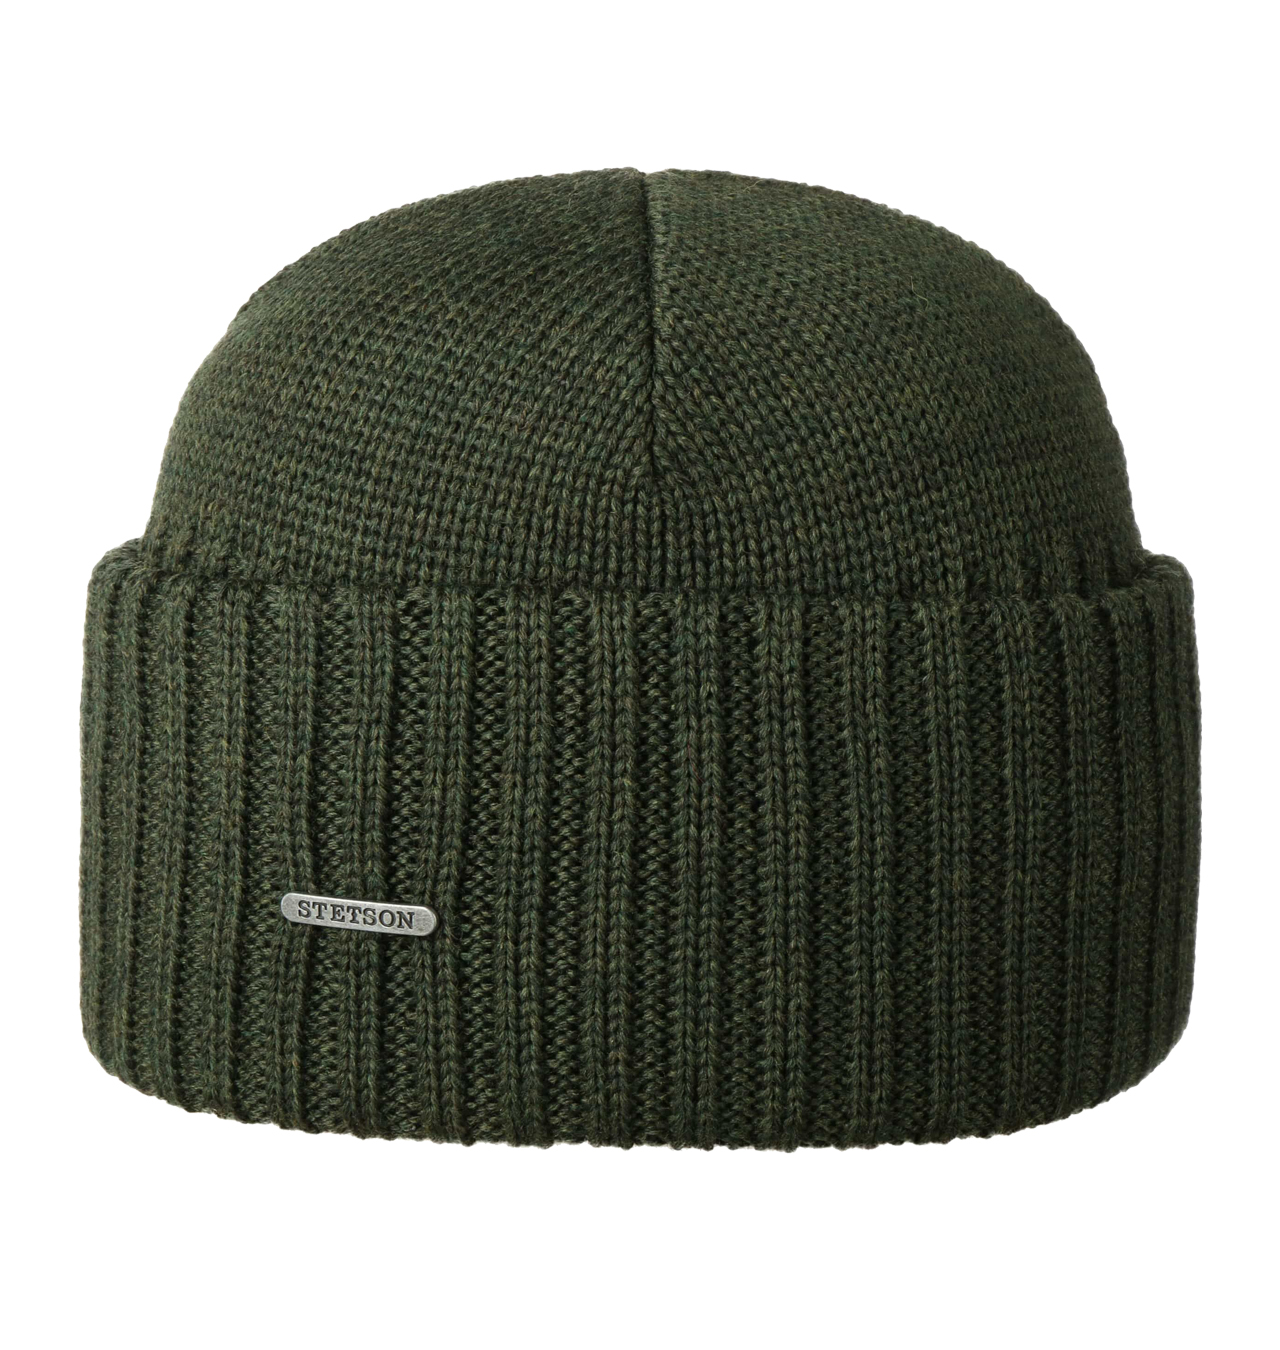 Stetson - Northport Wool Beanie - Olive